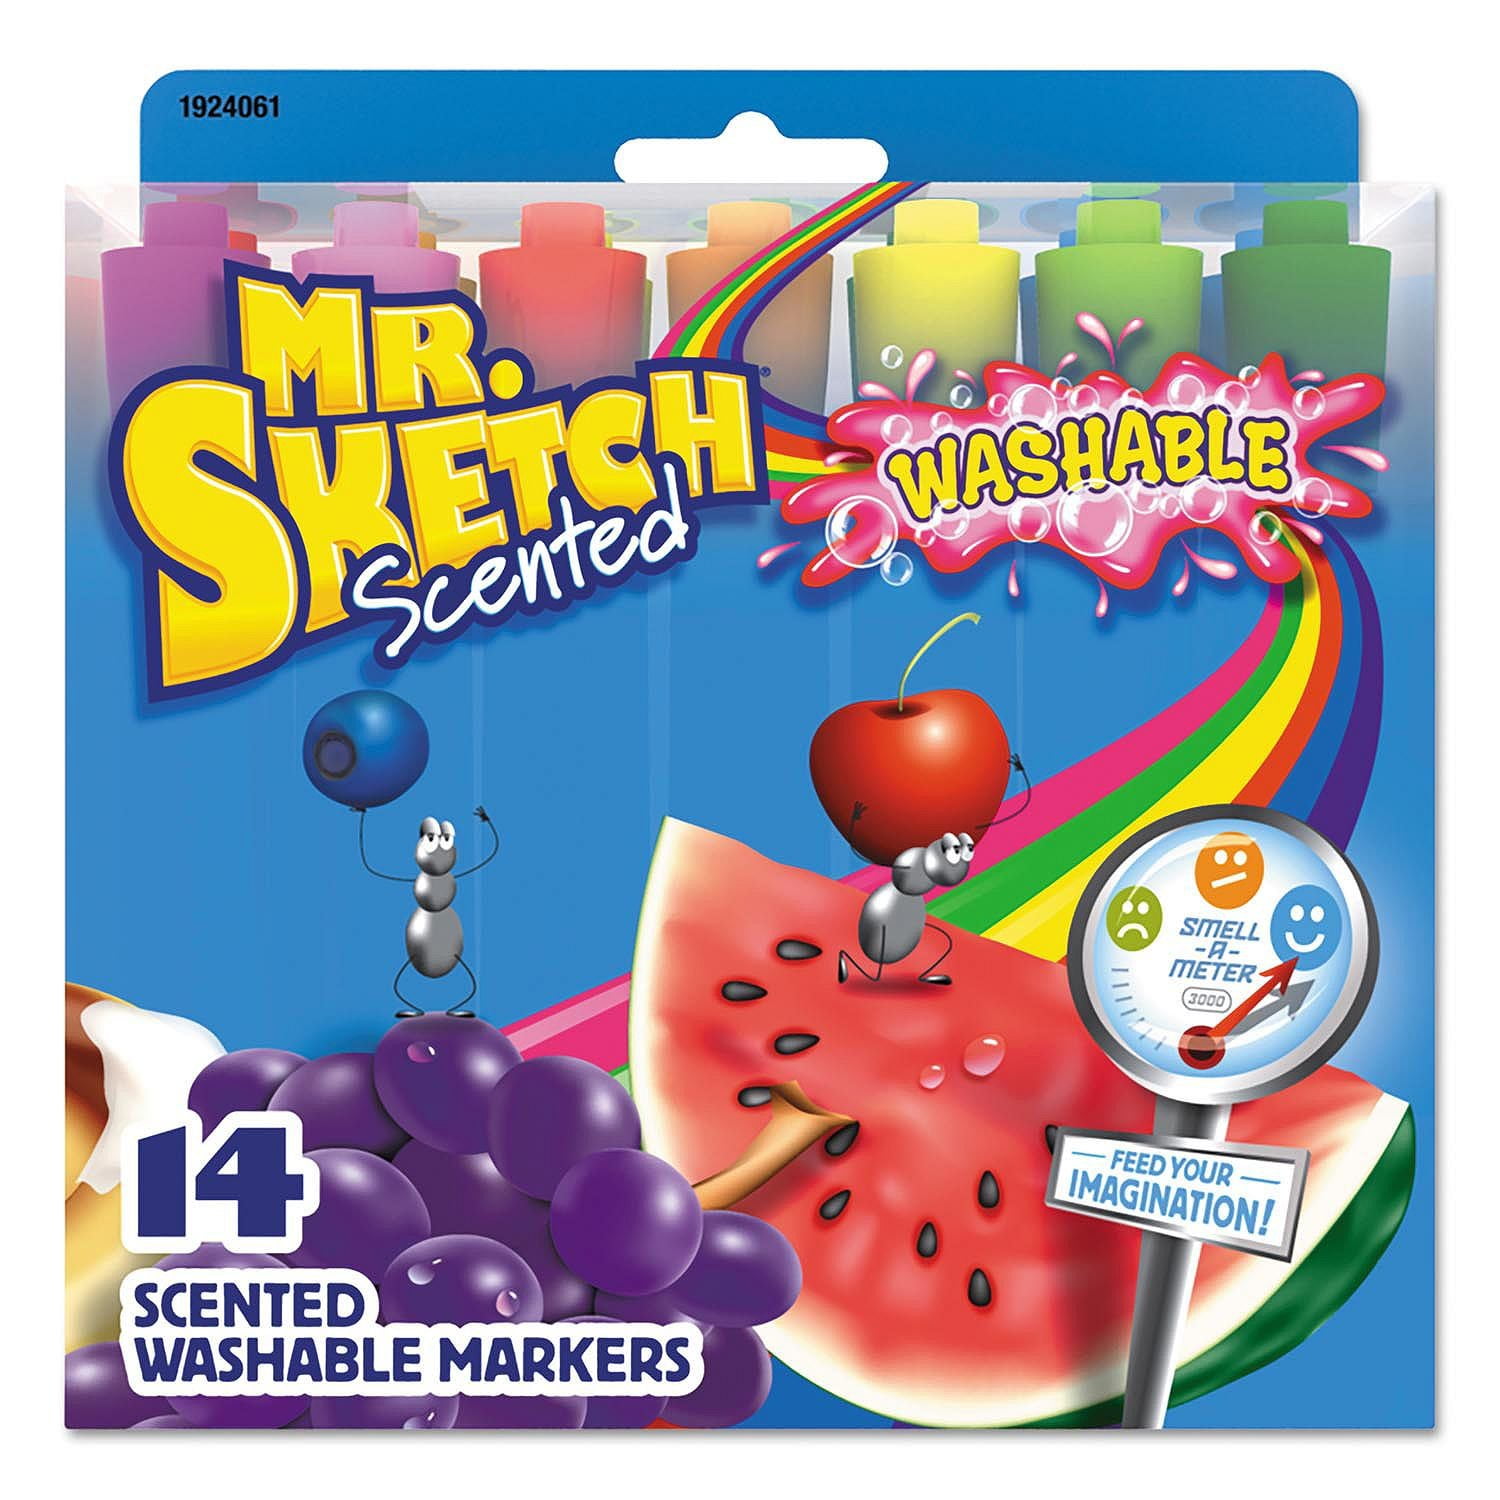 Tool Box Tuesday … with a Twist: Mr. Sketch Scented Markers